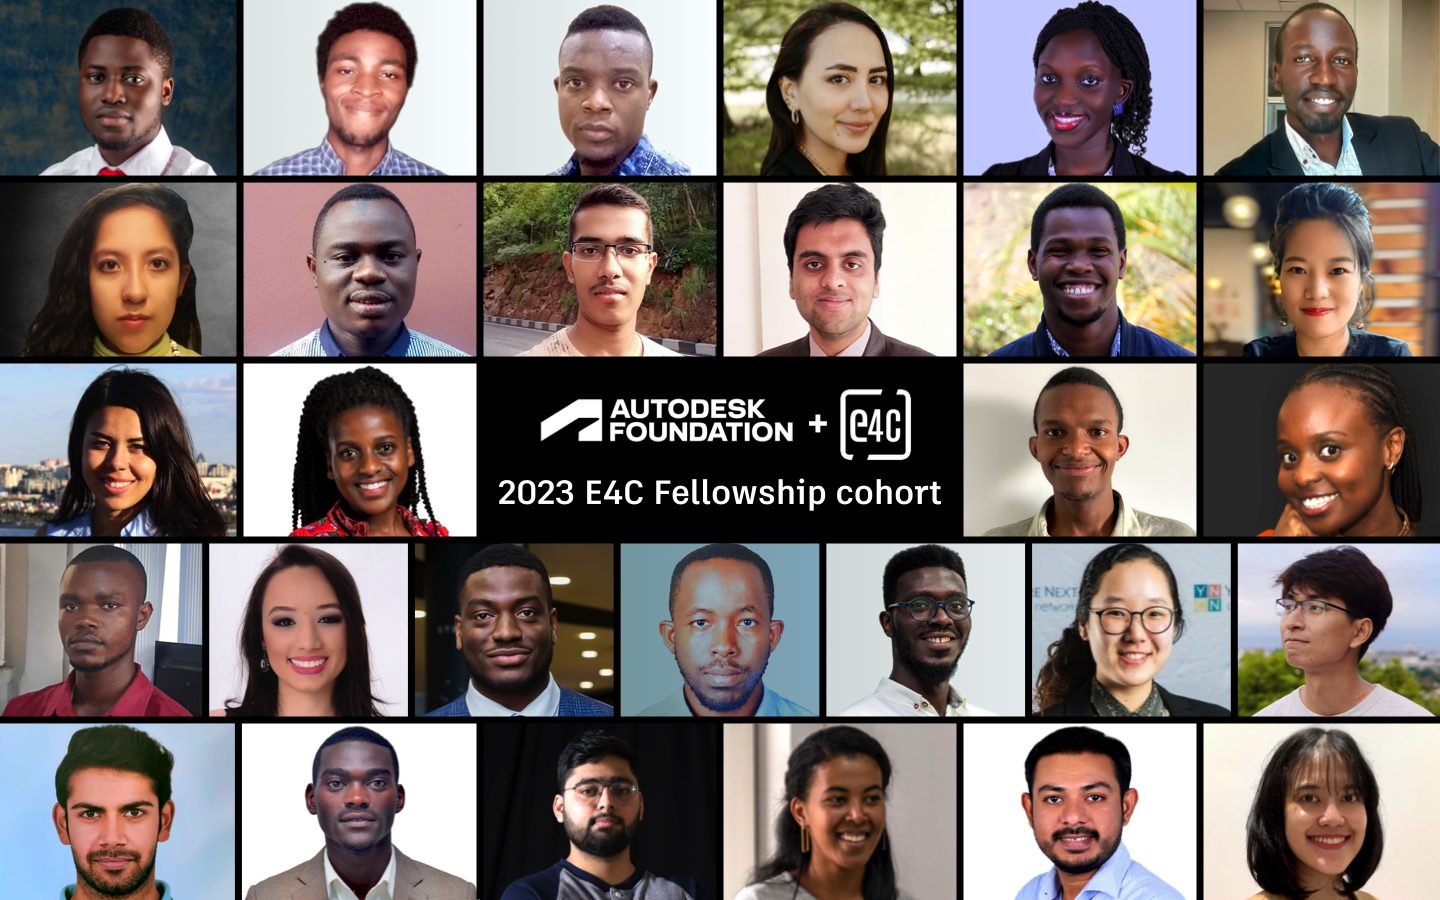 Grid/collage with headshot photos of 29 Autodesk Foundation-supported 2023 E4C Fellows.